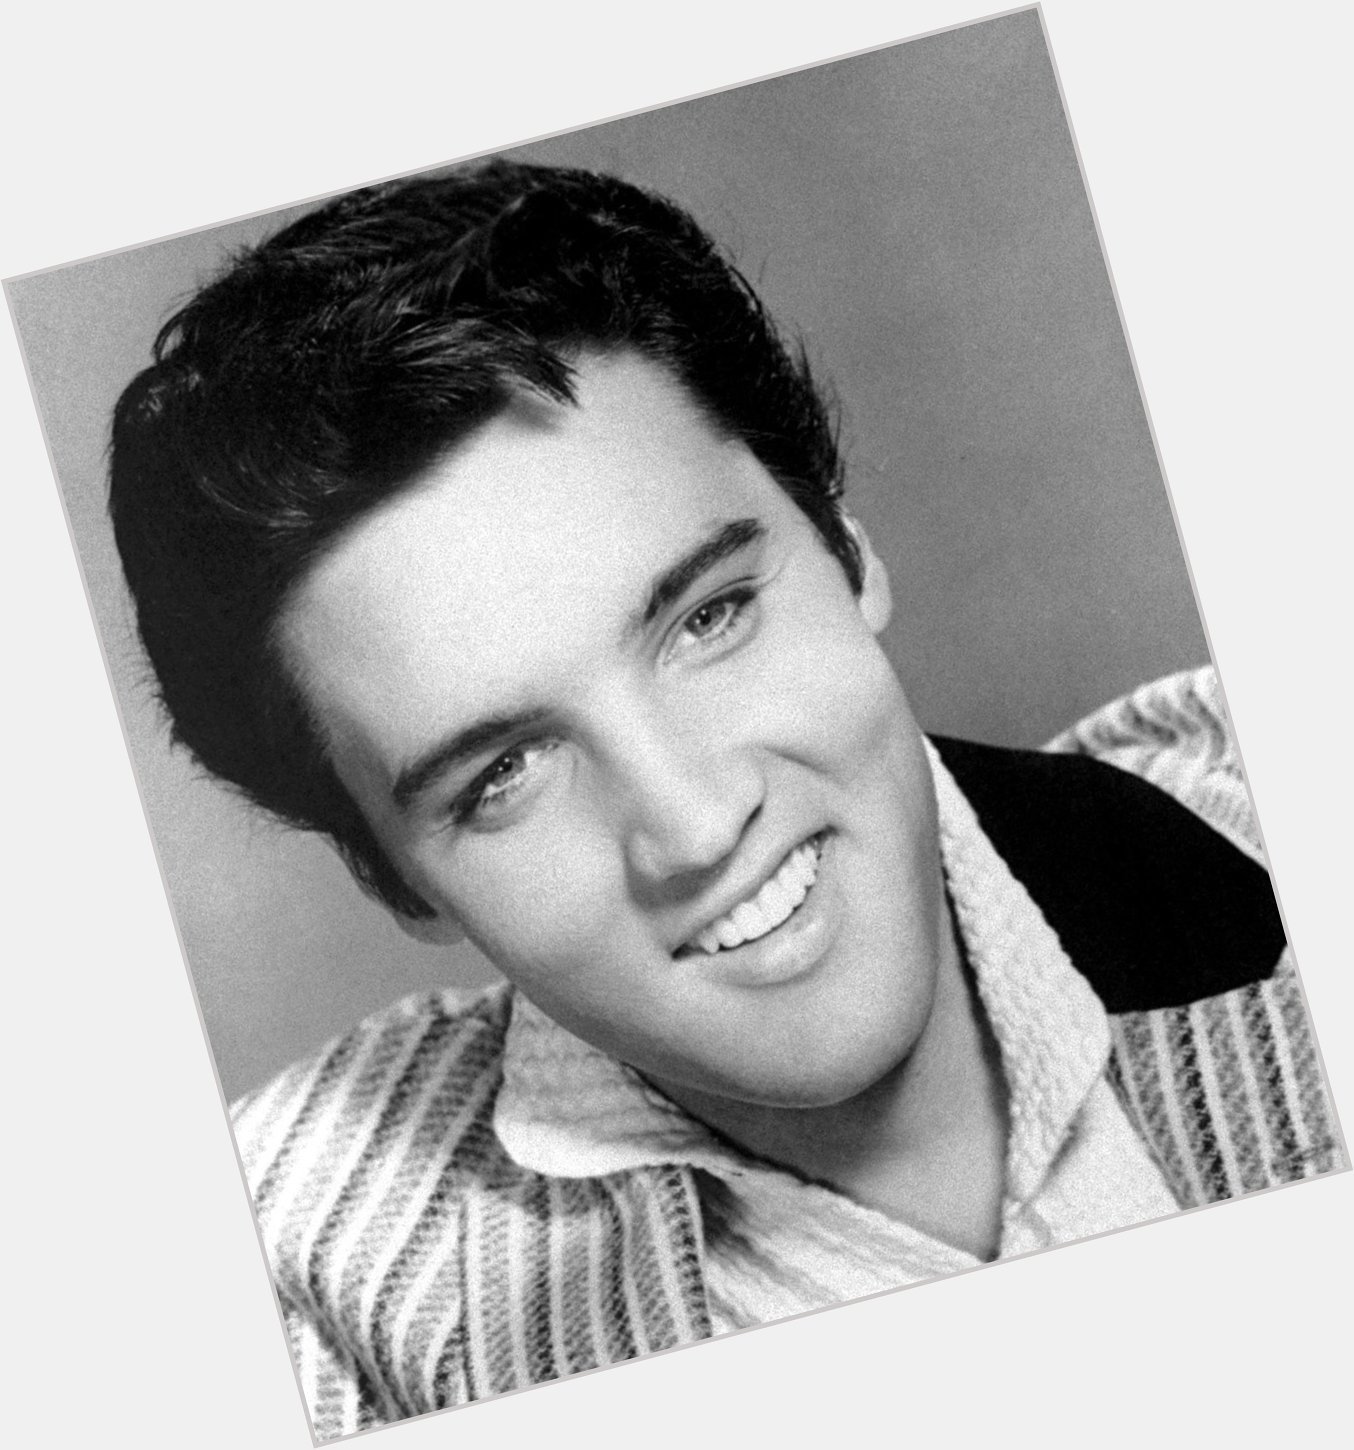 Are you lonesome tonight... do you miss me tonight?

Happy birthday Elvis Presley, 80 years old 